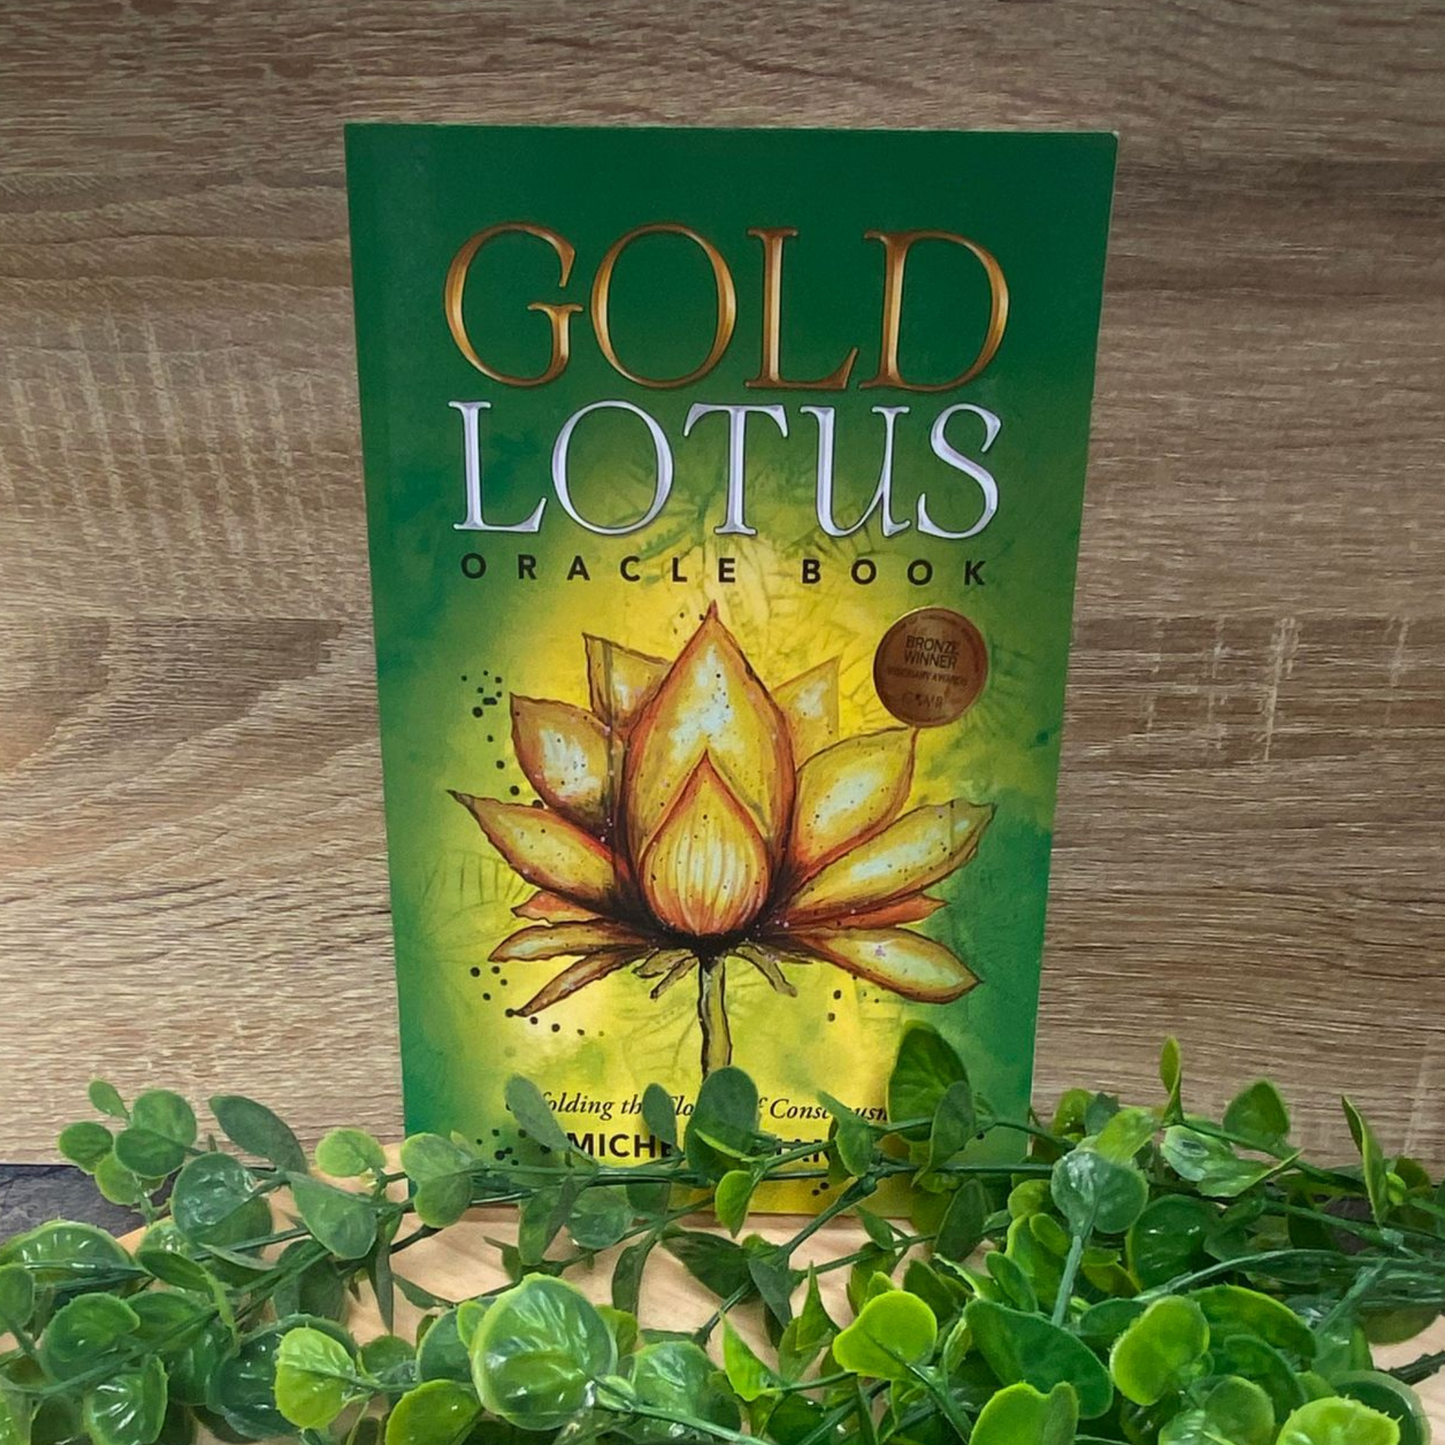 Gold Lotus Oracle Book - Unfolding the Flower of Consciousness - Michelle Mann